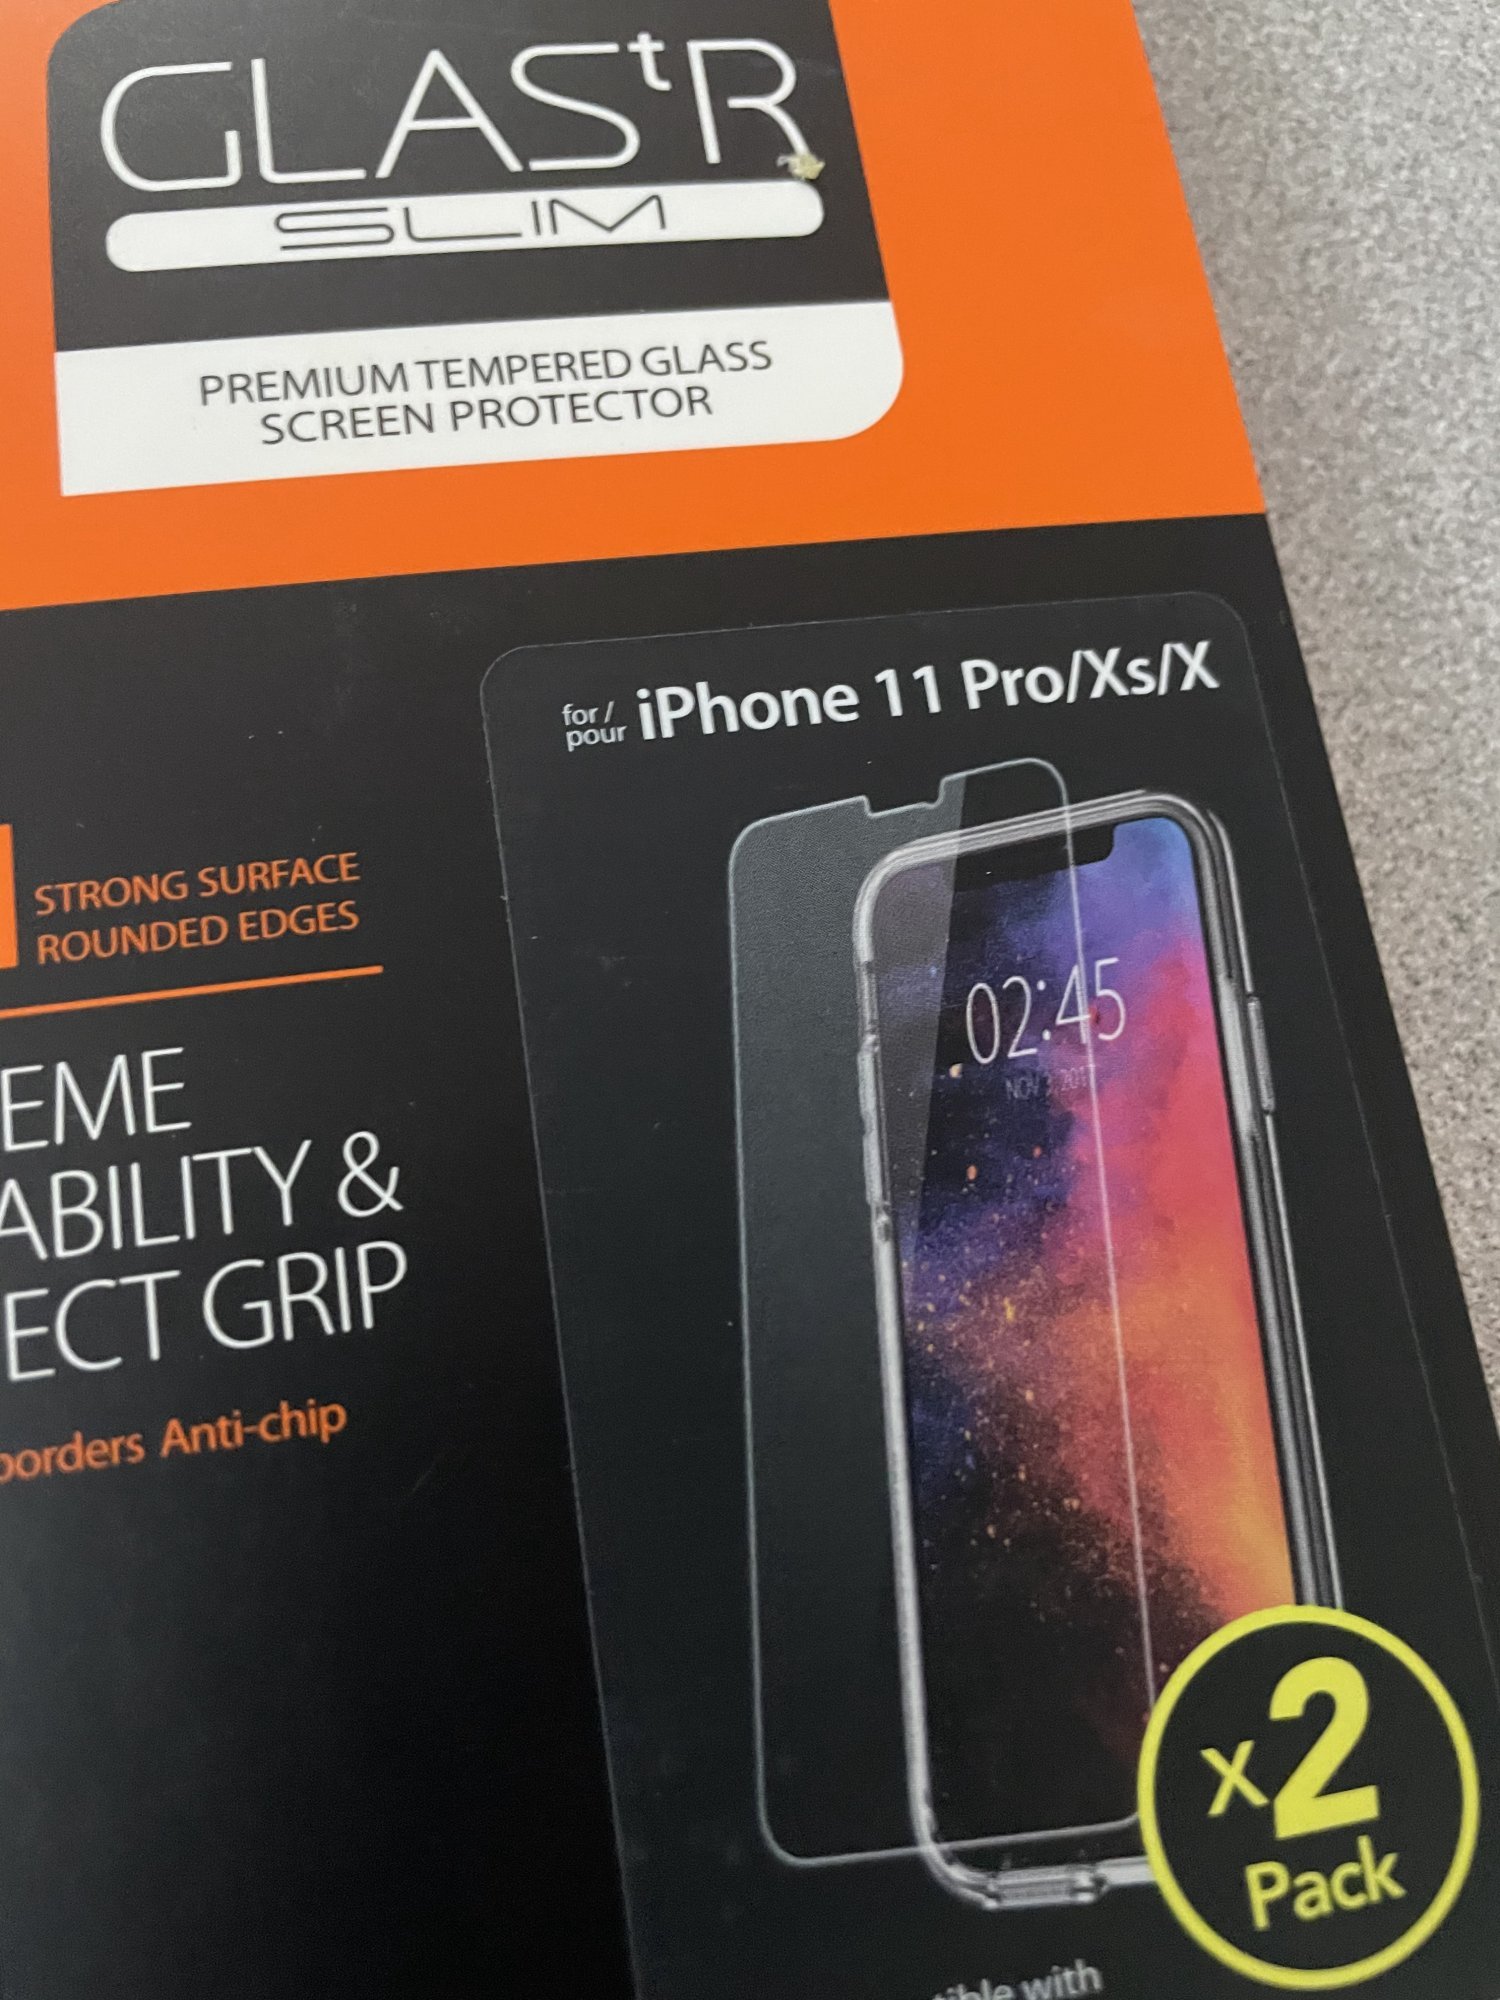 Will iPhone 11 screen protectors fit the iPhone 12 Pro?